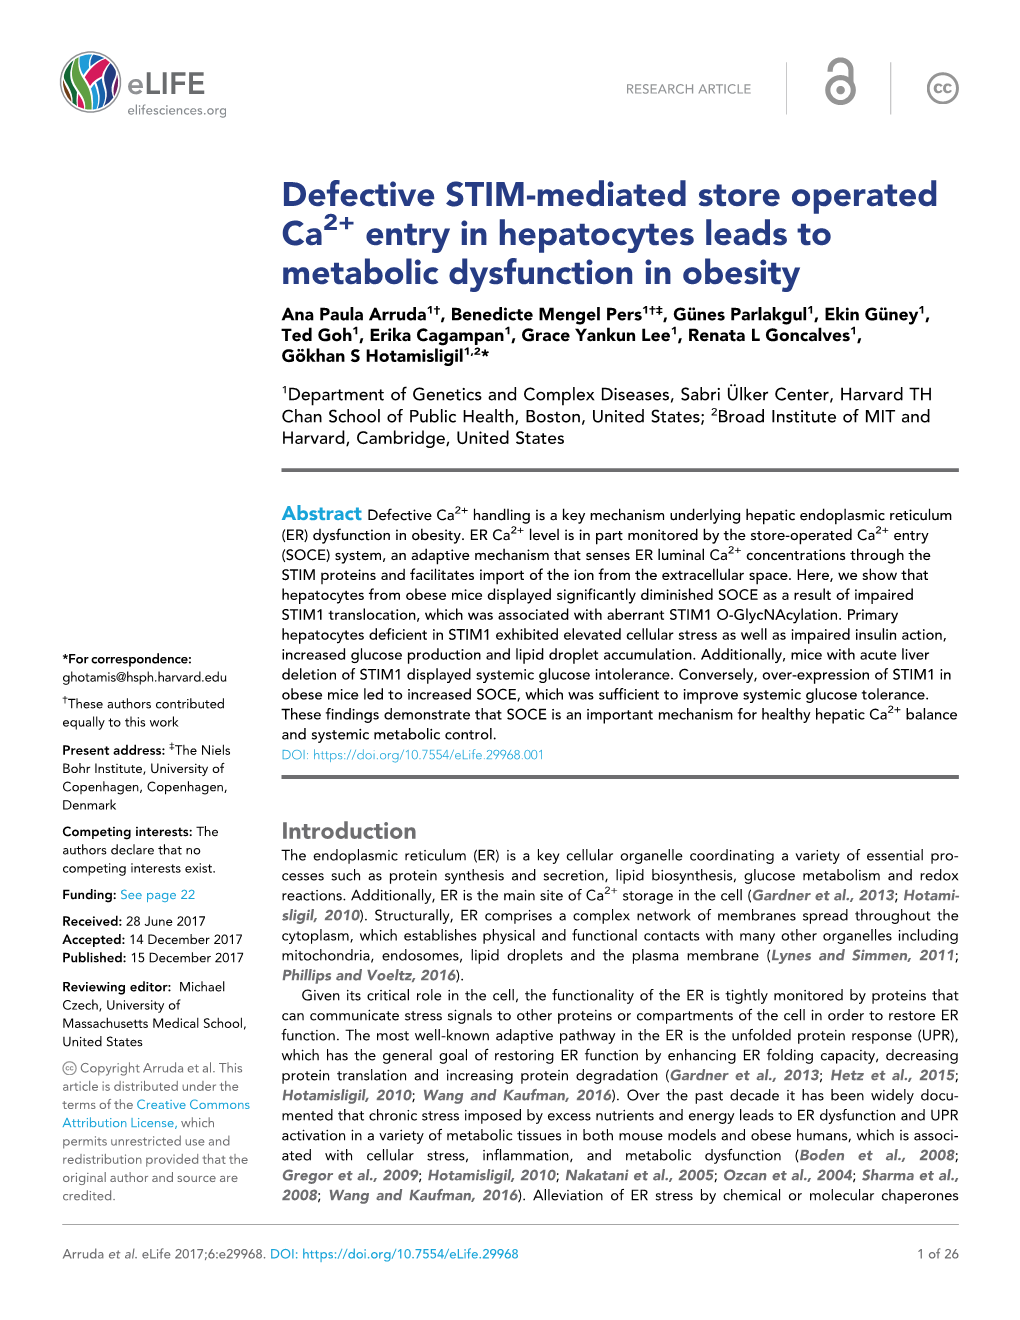 Defective STIM-Mediated Store Operated Ca Entry in Hepatocytes